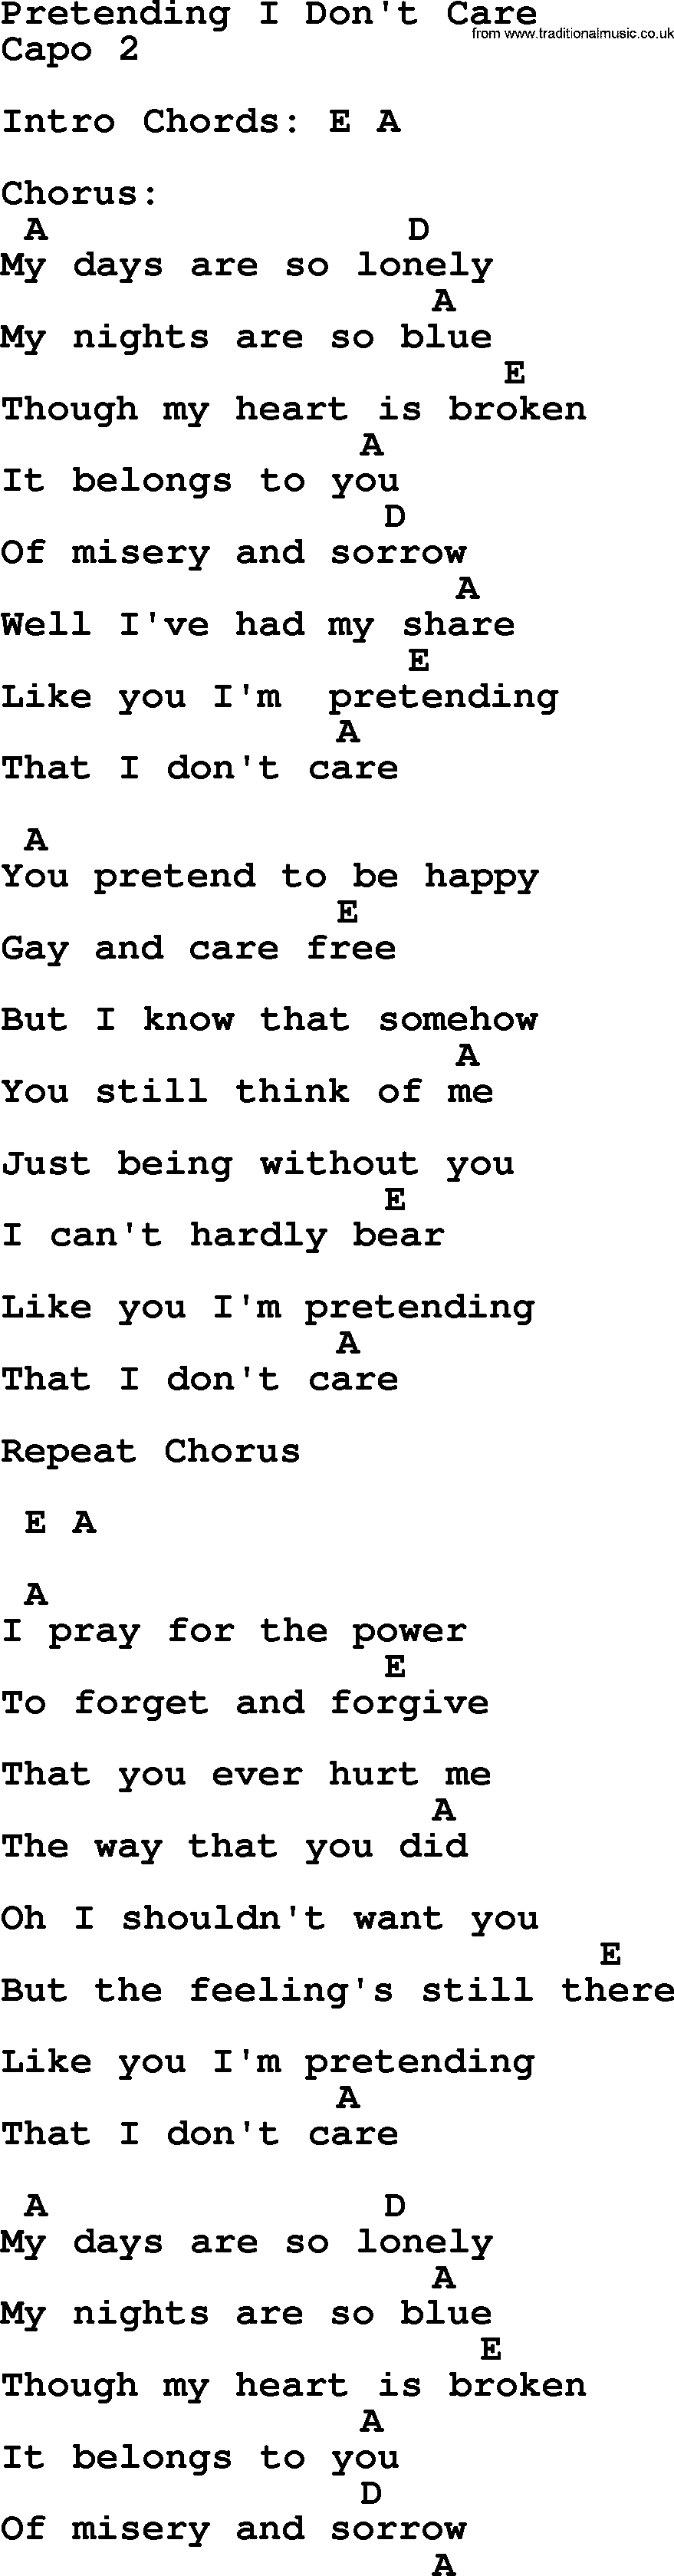 Bluegrass song: Pretending I Don't Care, lyrics and chords